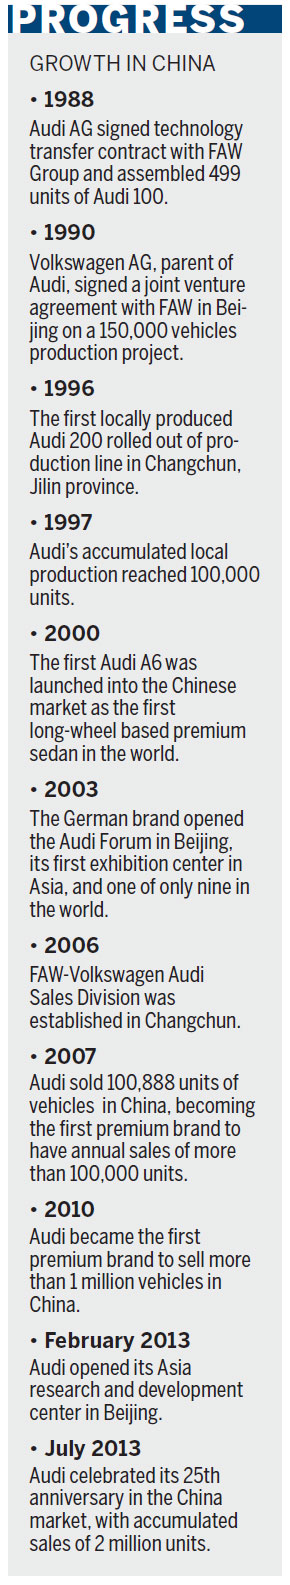 Auto Special: Audi making milestones in Chinese market